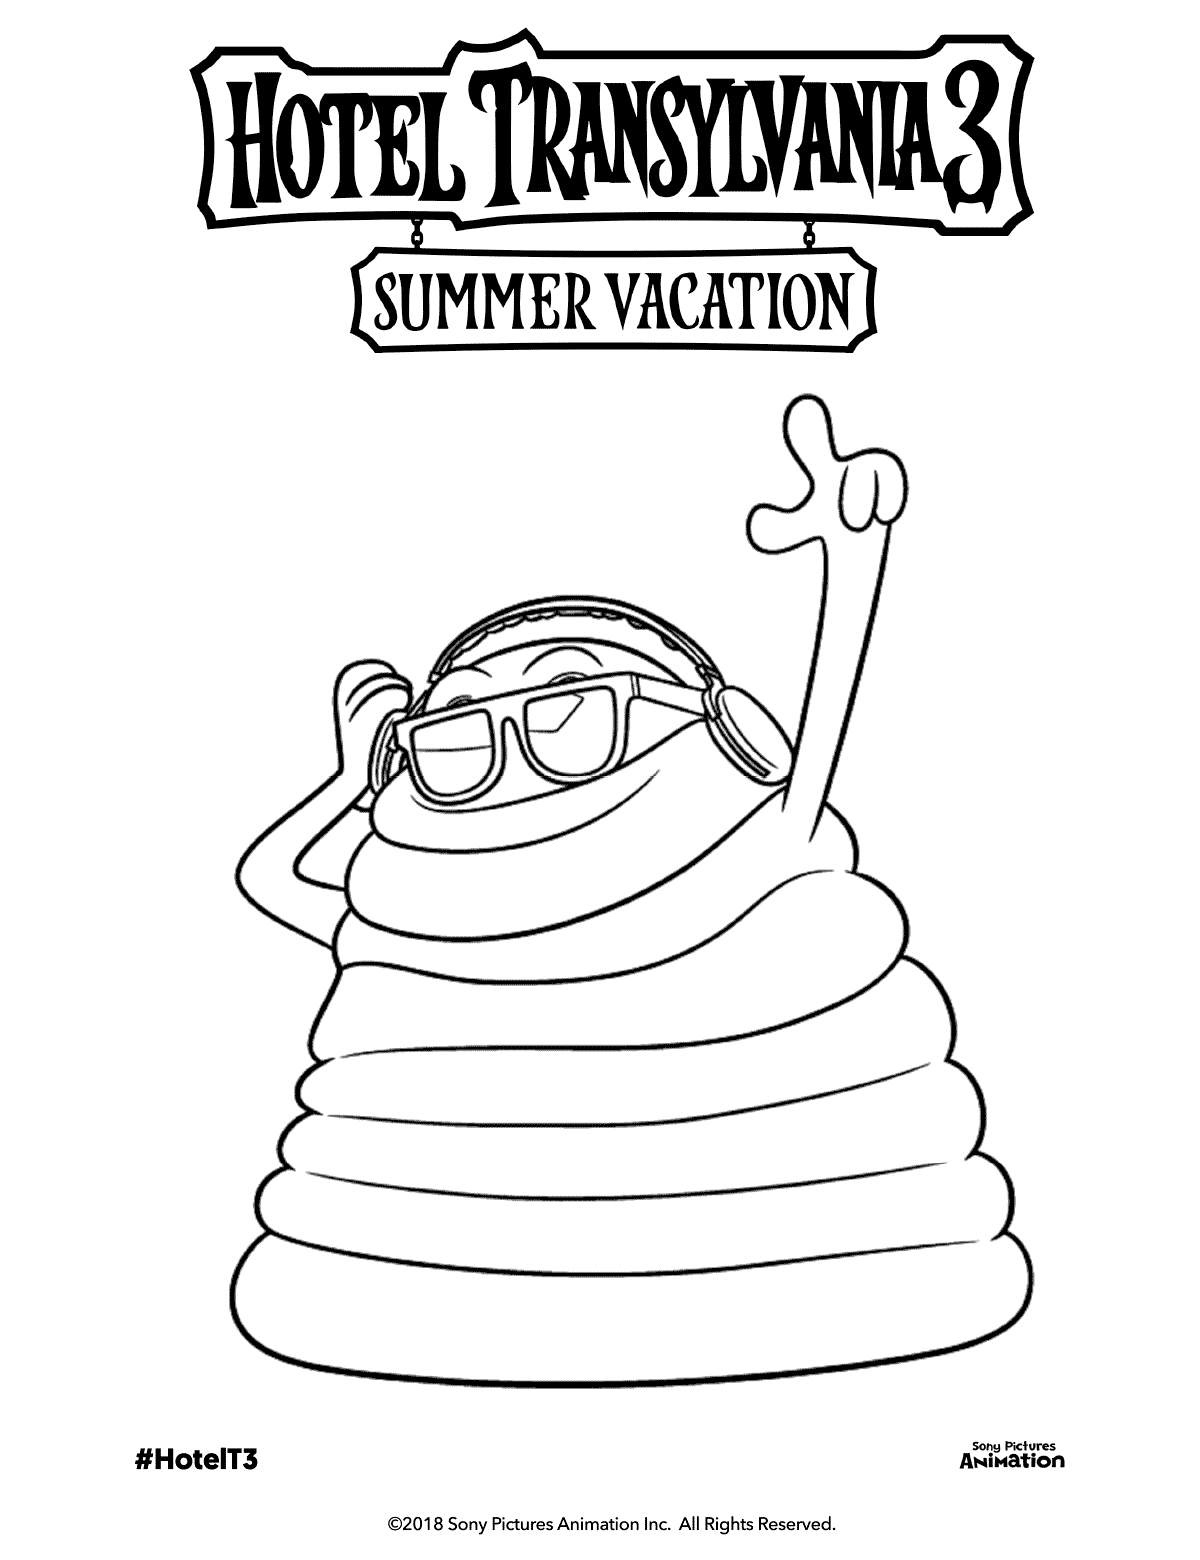 Jell O Blobby Hotel Transylvania 3 Coloring Pages To Print